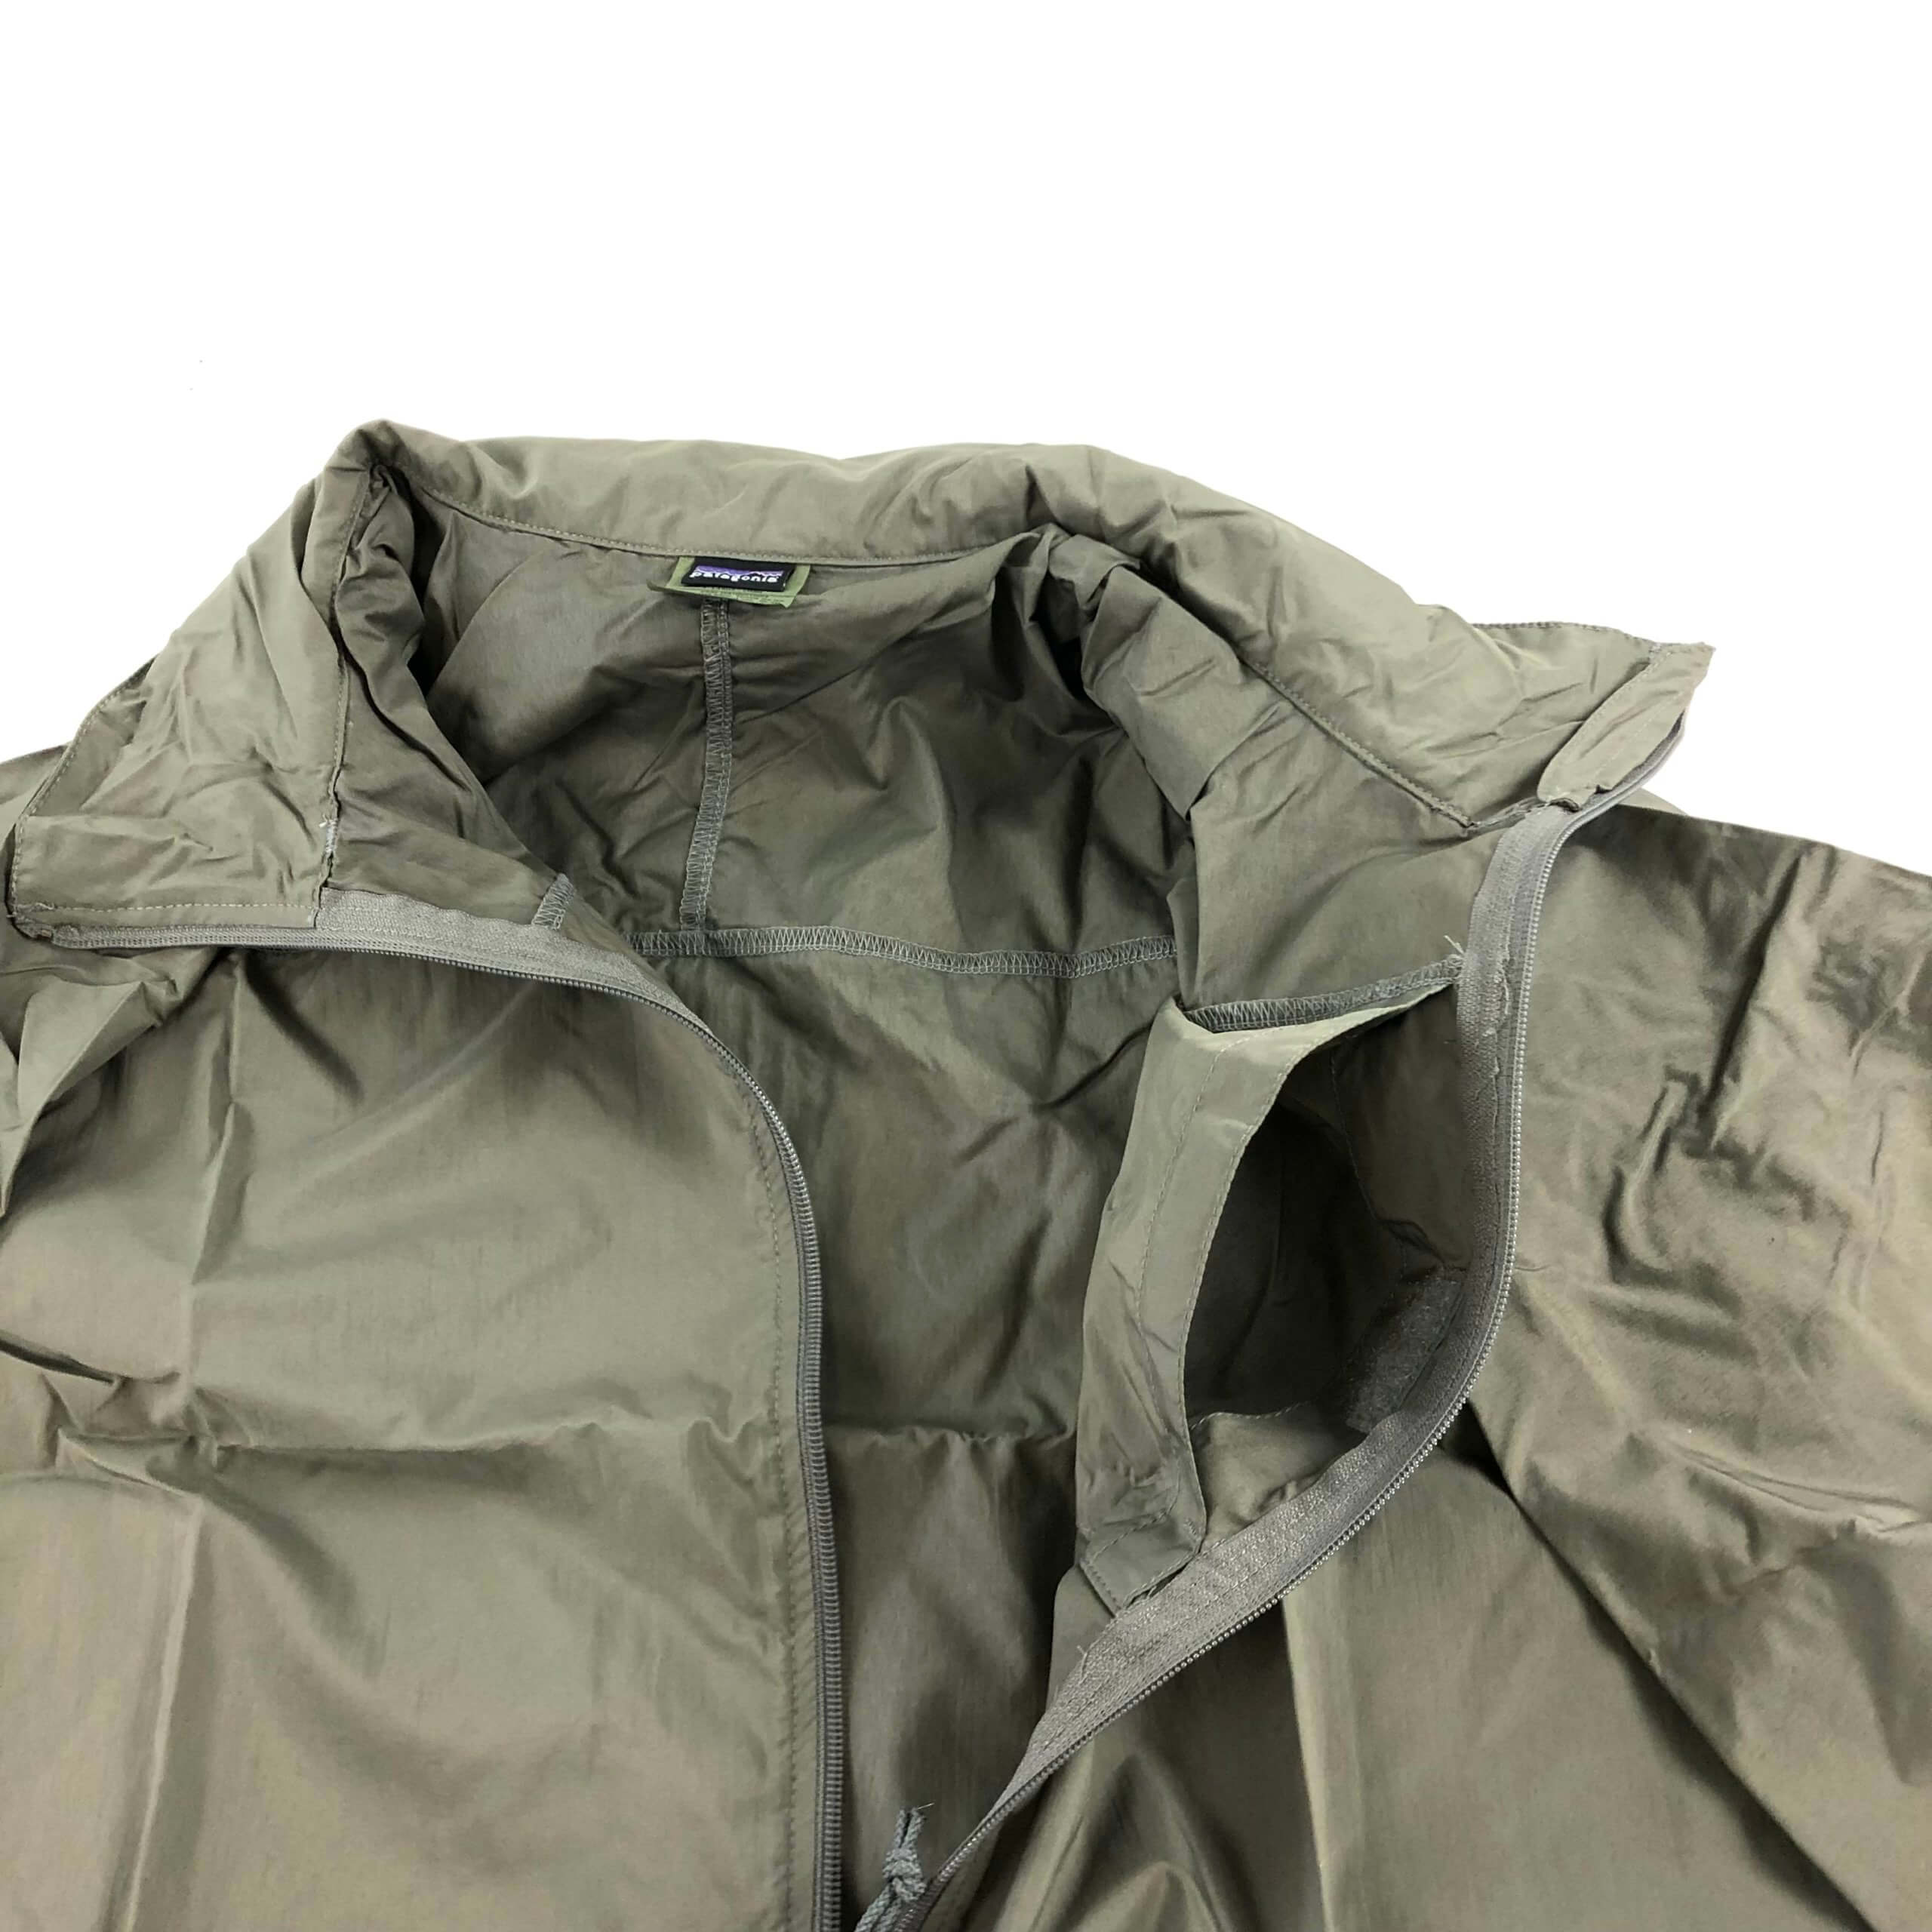 Patagonia PCU Level 4 Wind Jacket for Speical Forces - FAST delivery!